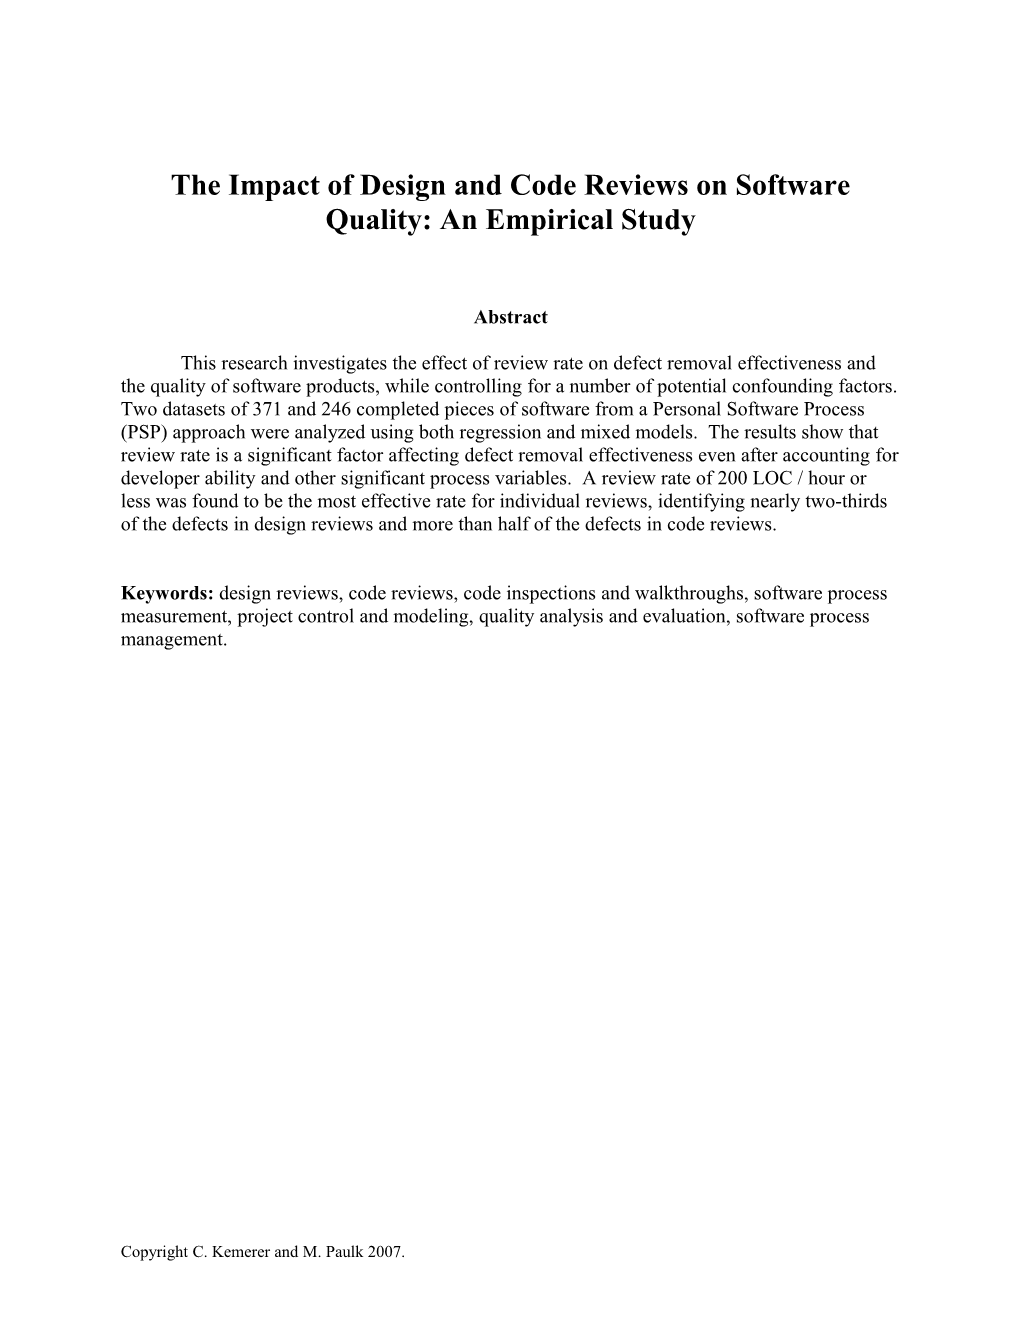 The Impact of Design and Code Reviews on Software Quality: an Empirical Study